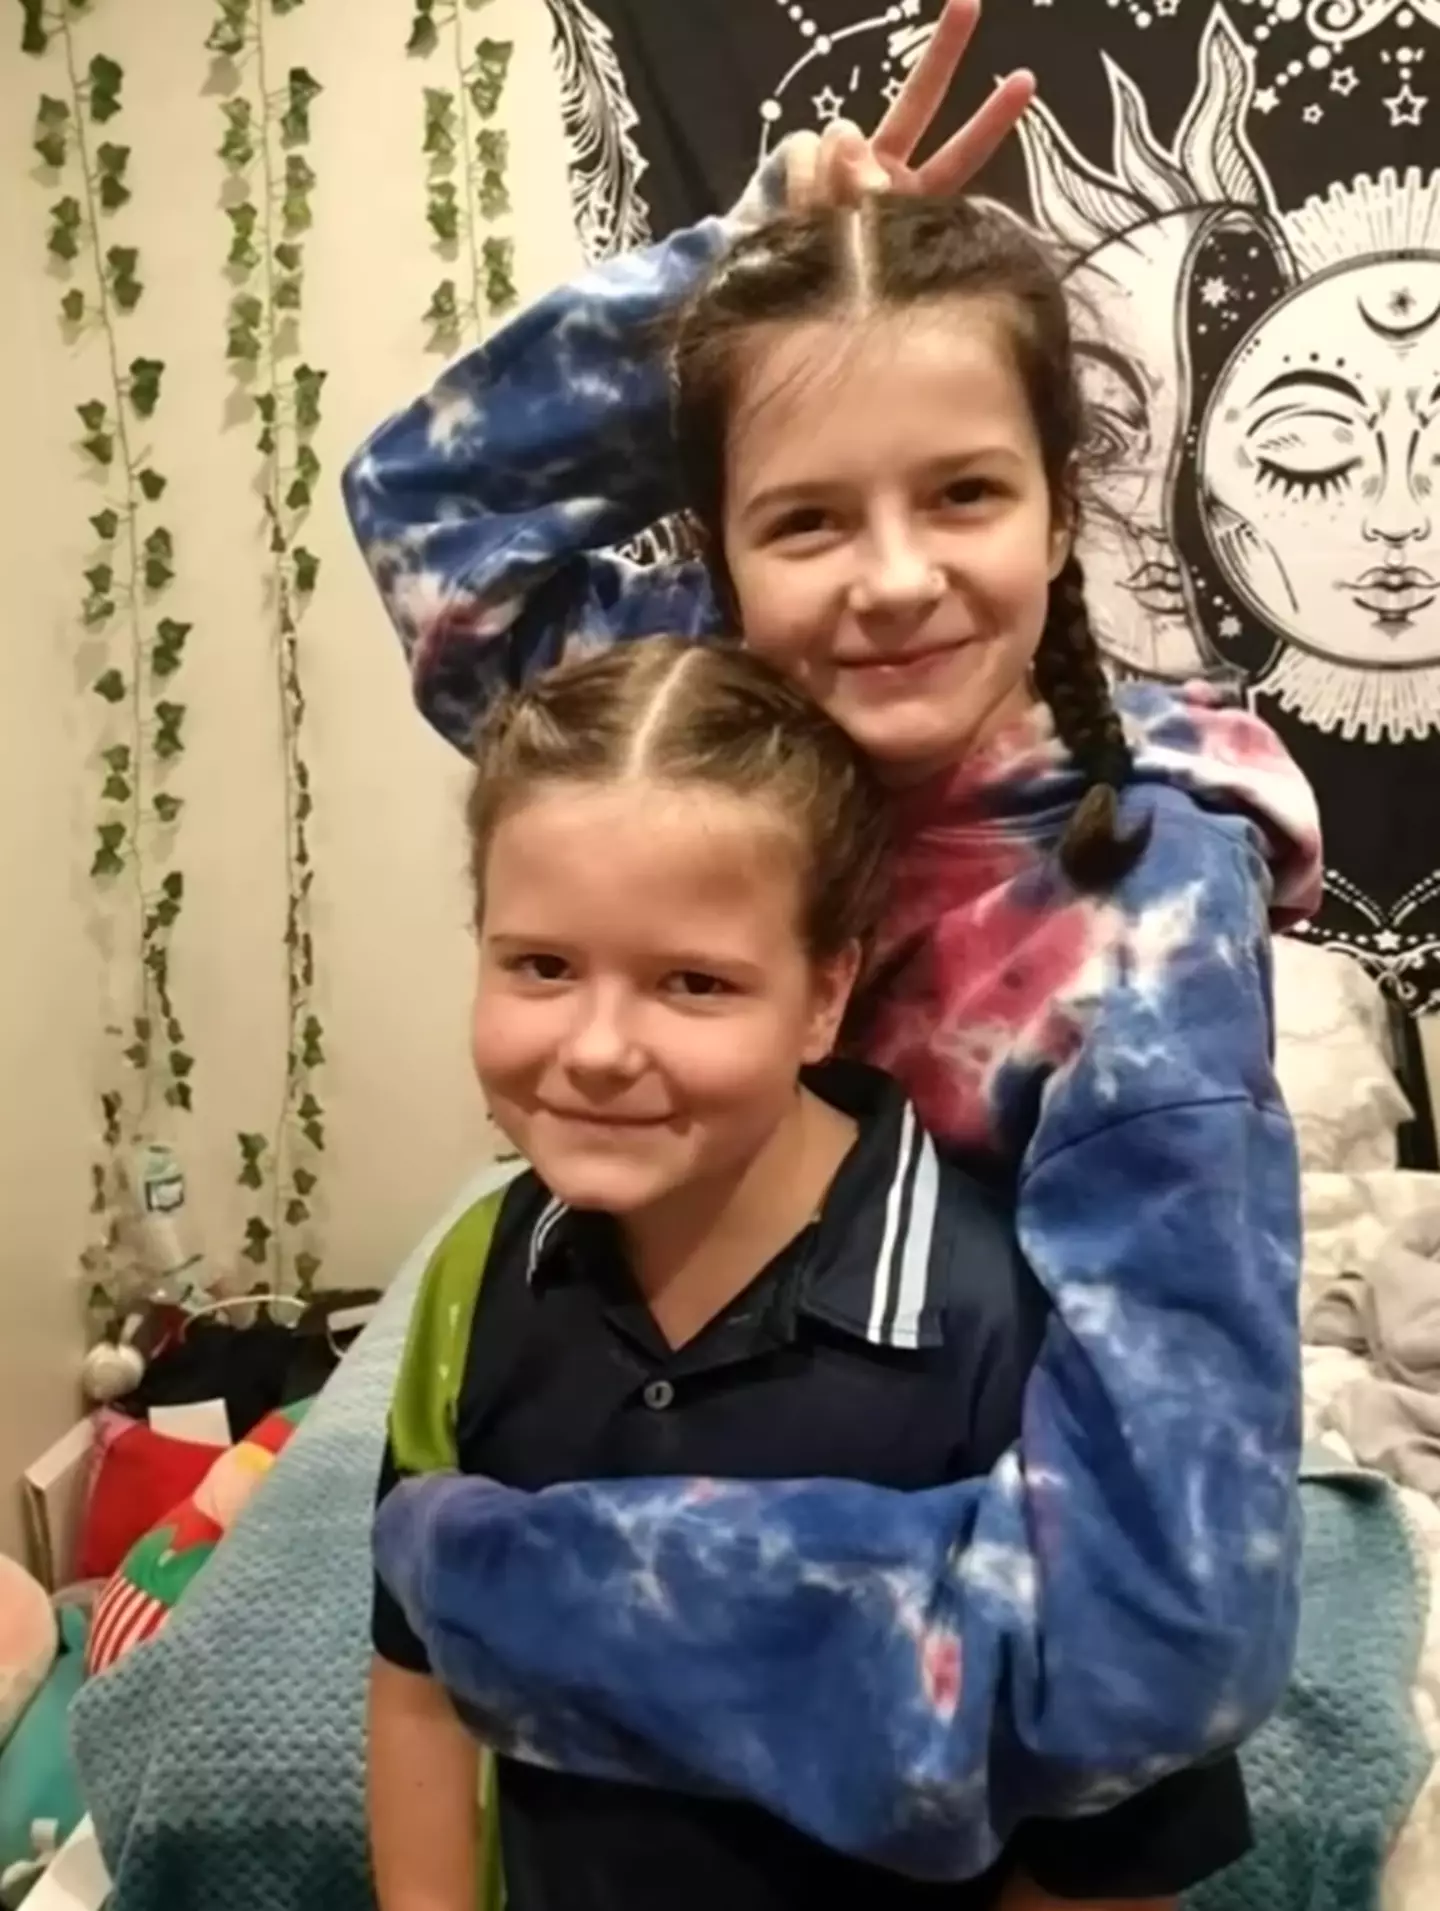 Mieka's 10-year-old sister Freya is in an induced coma.